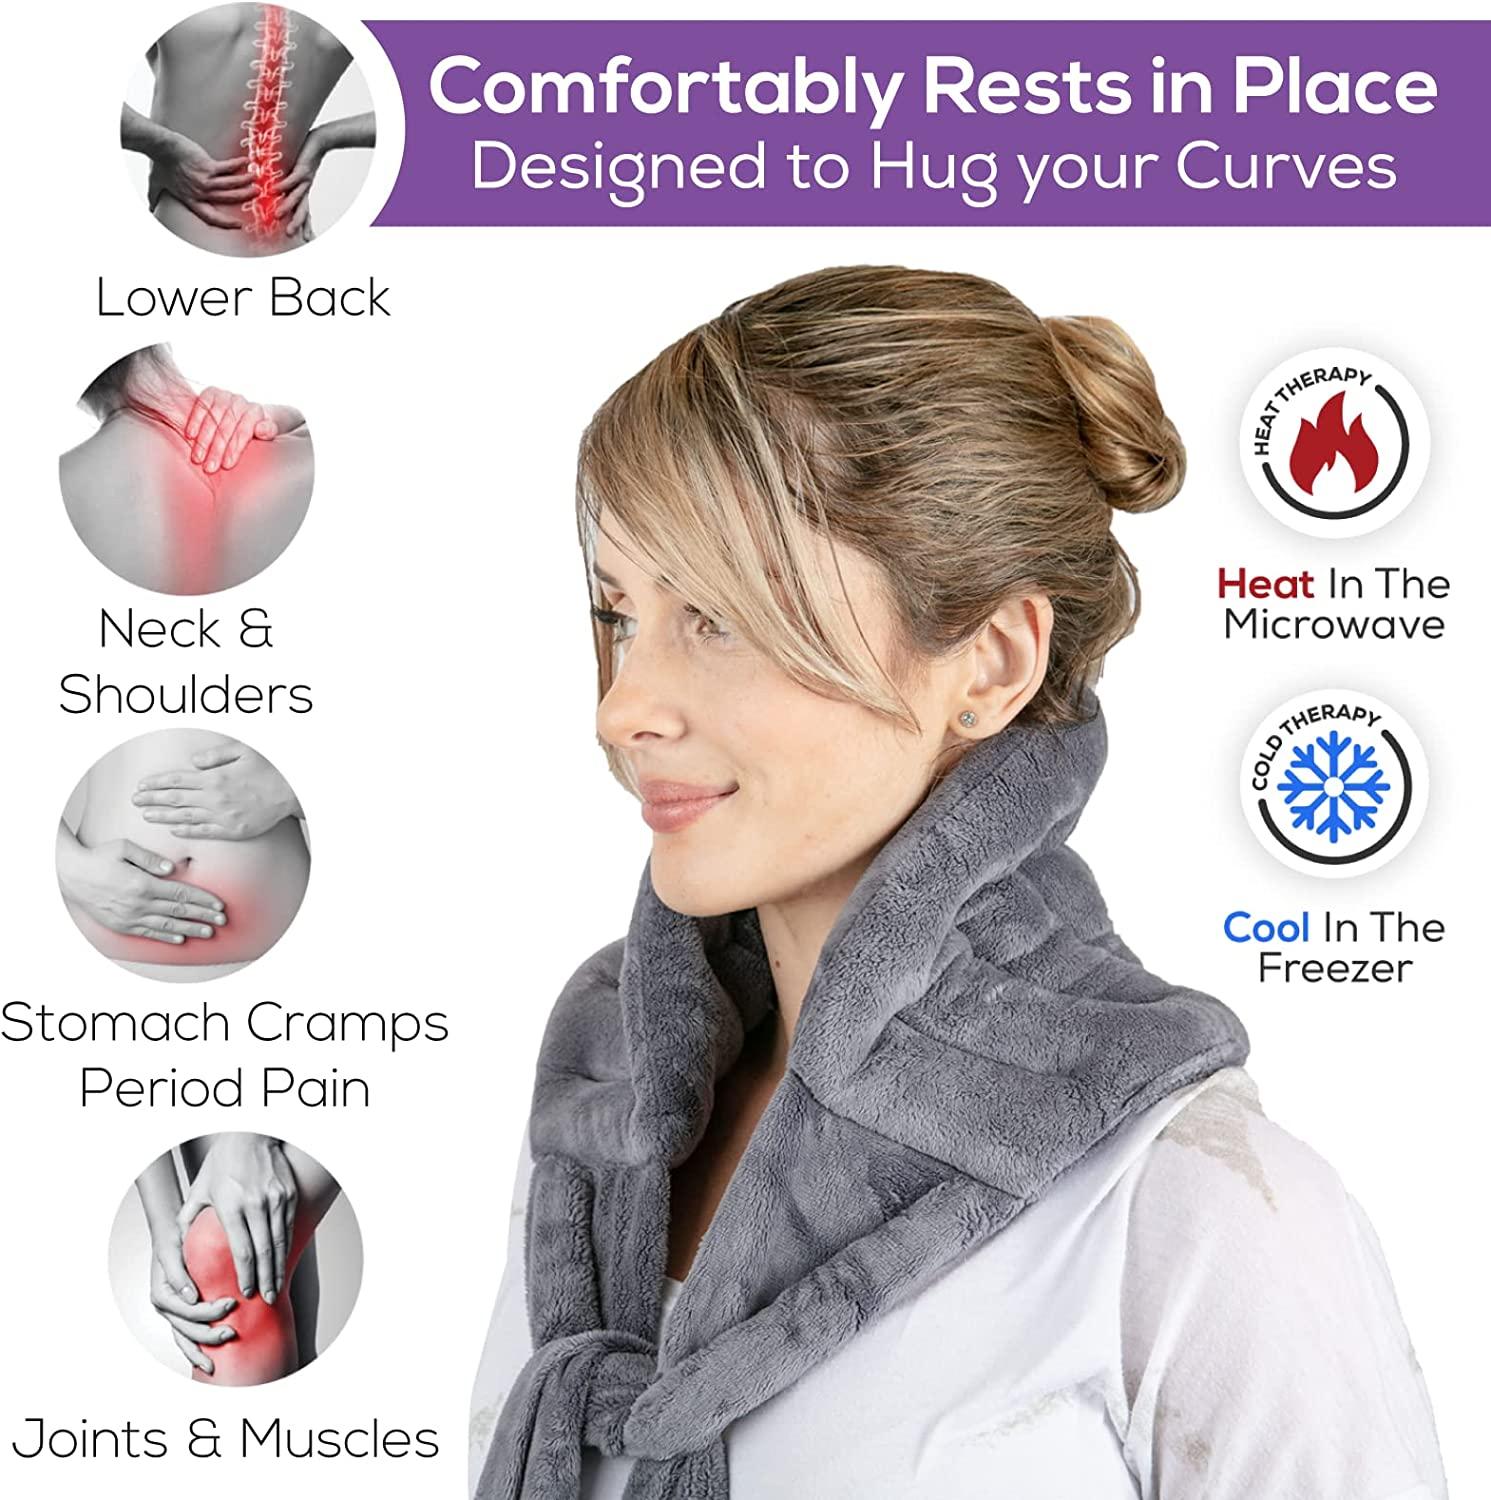 Rice-flax Seed Therapeutic Heating/cooling Pad and Neck Wrap 